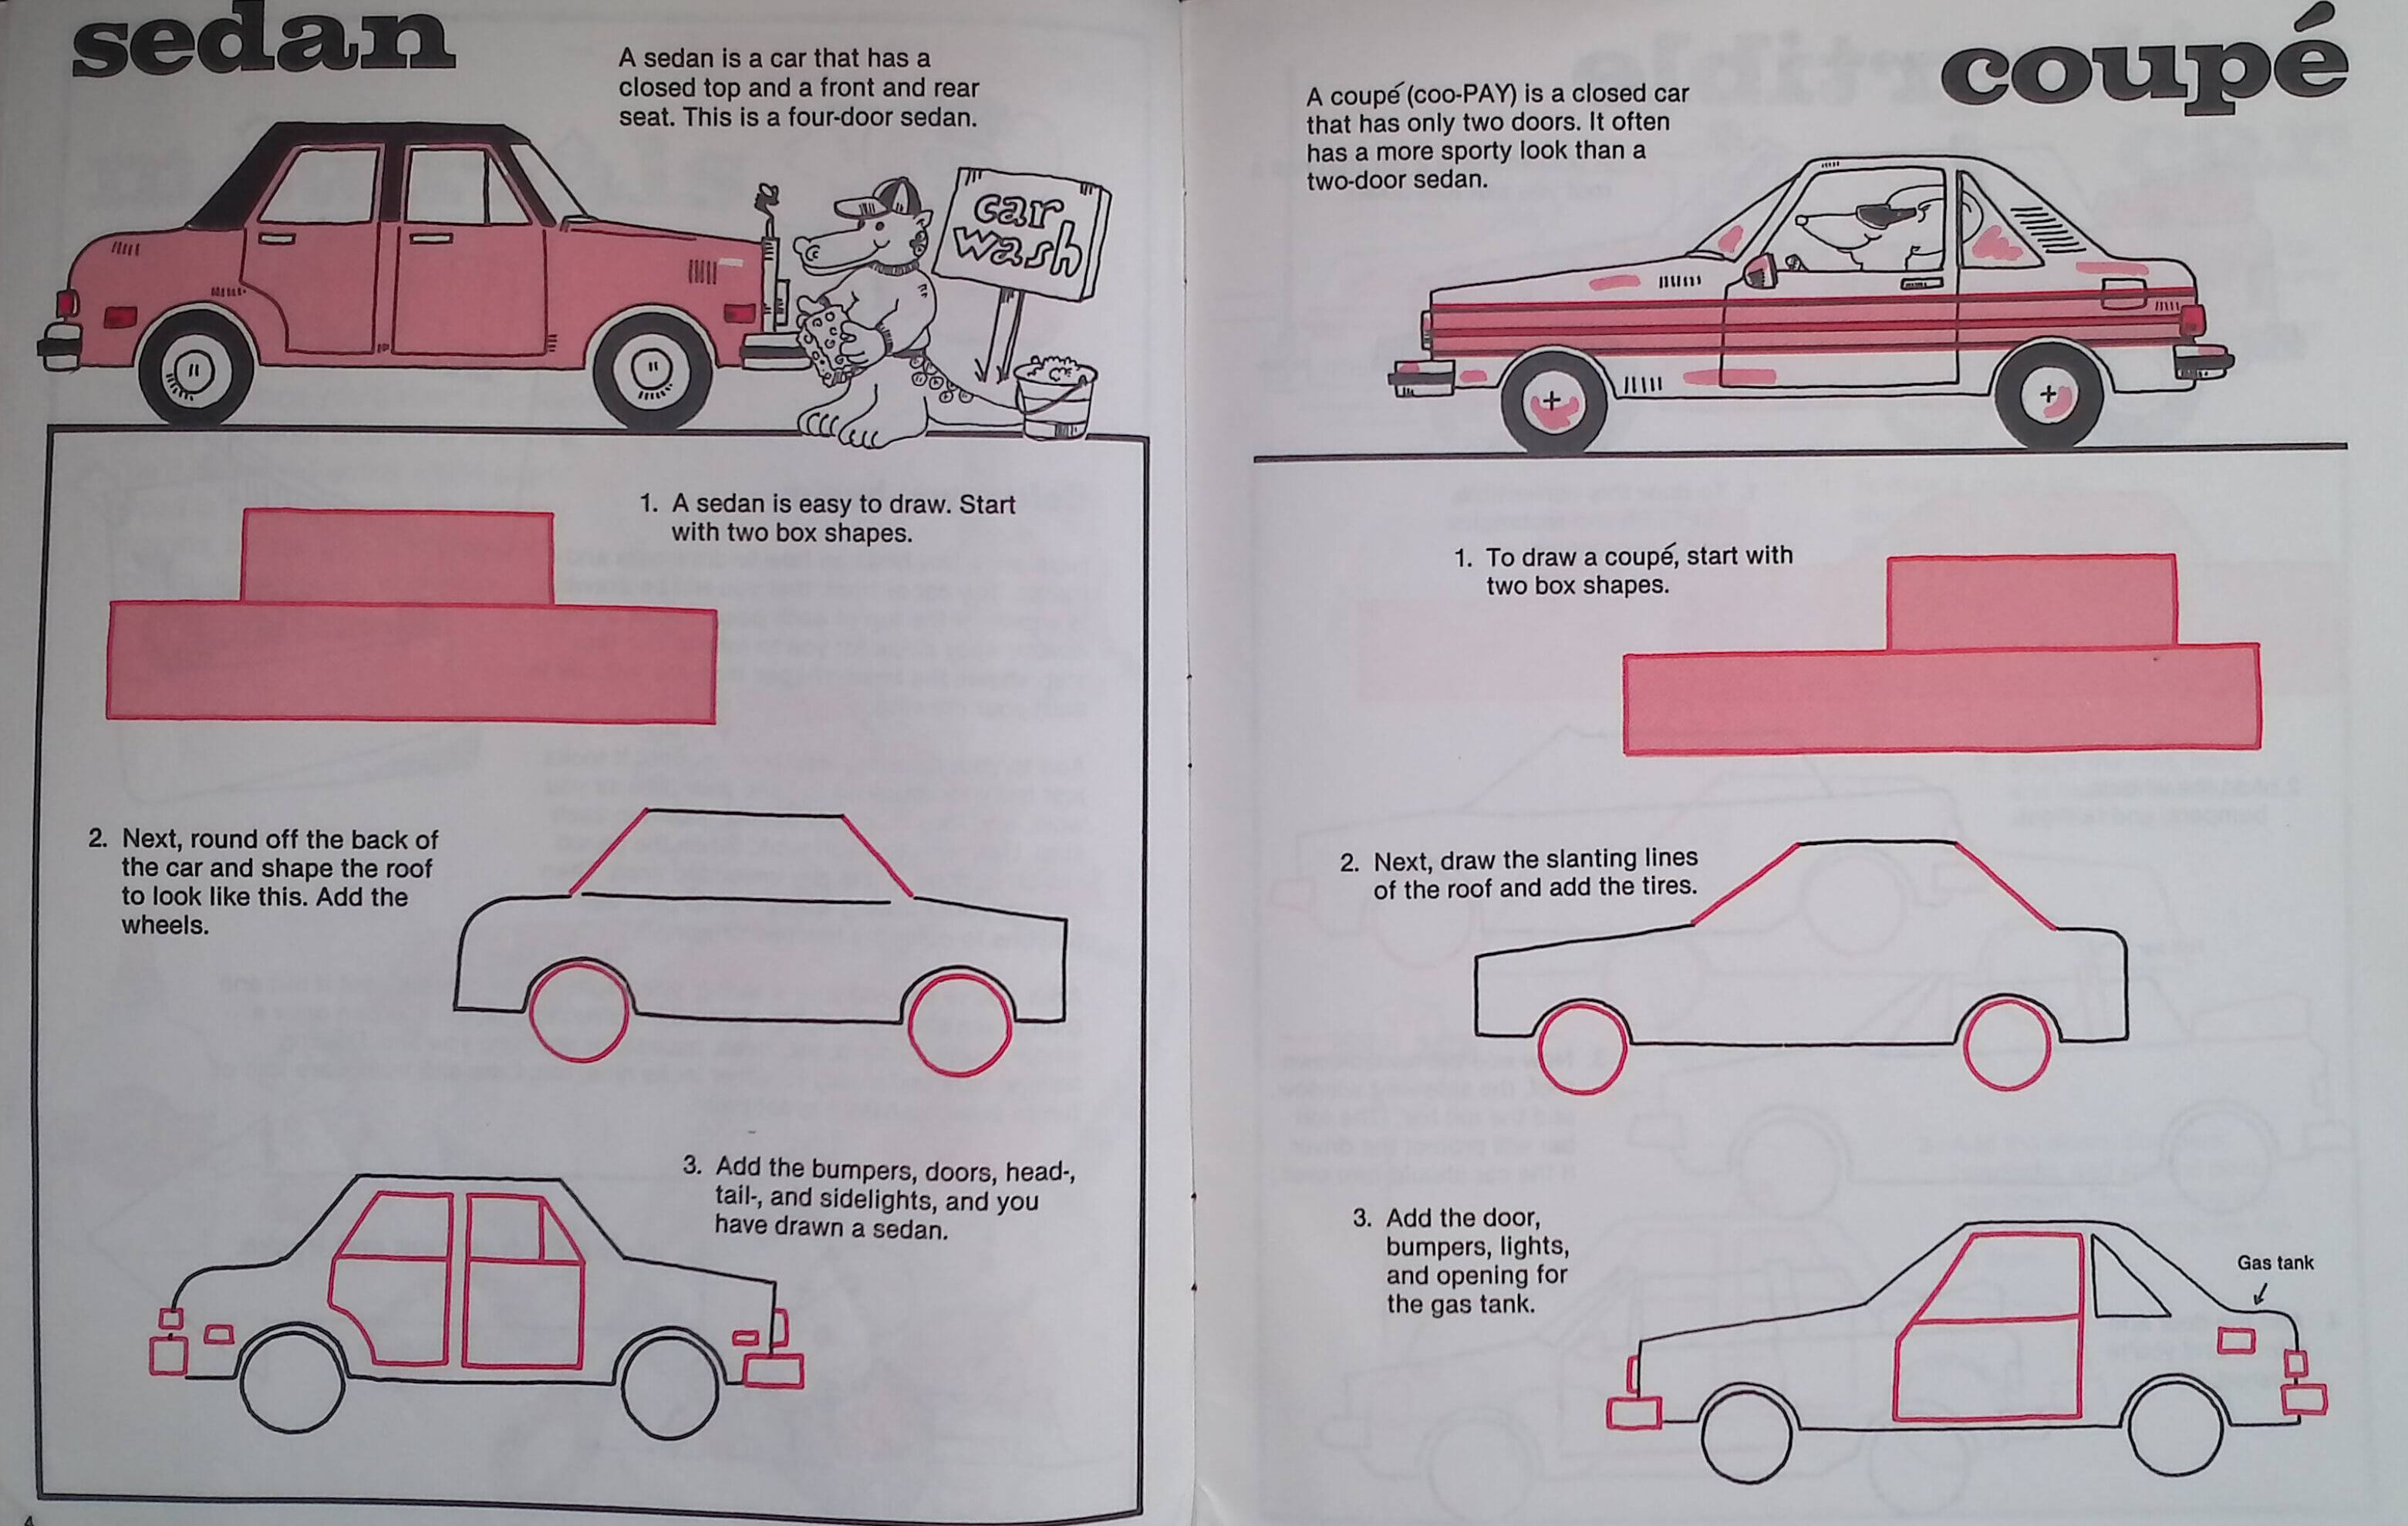 How to Draw Cars and Trucks